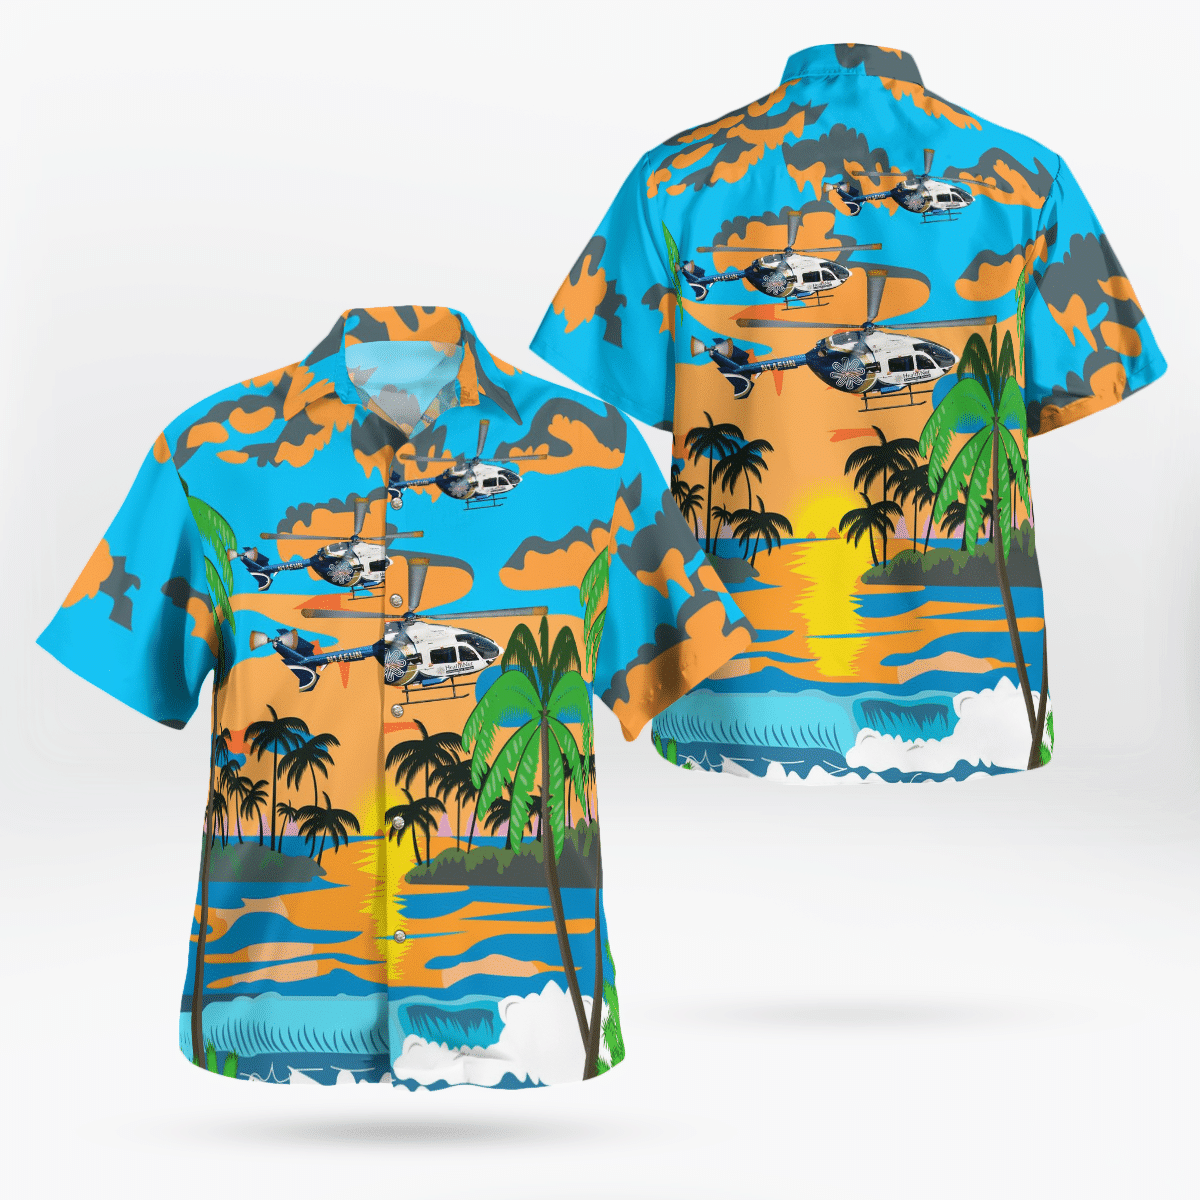 If you are in need of a new summertime look, pick up this Hawaiian shirt 69